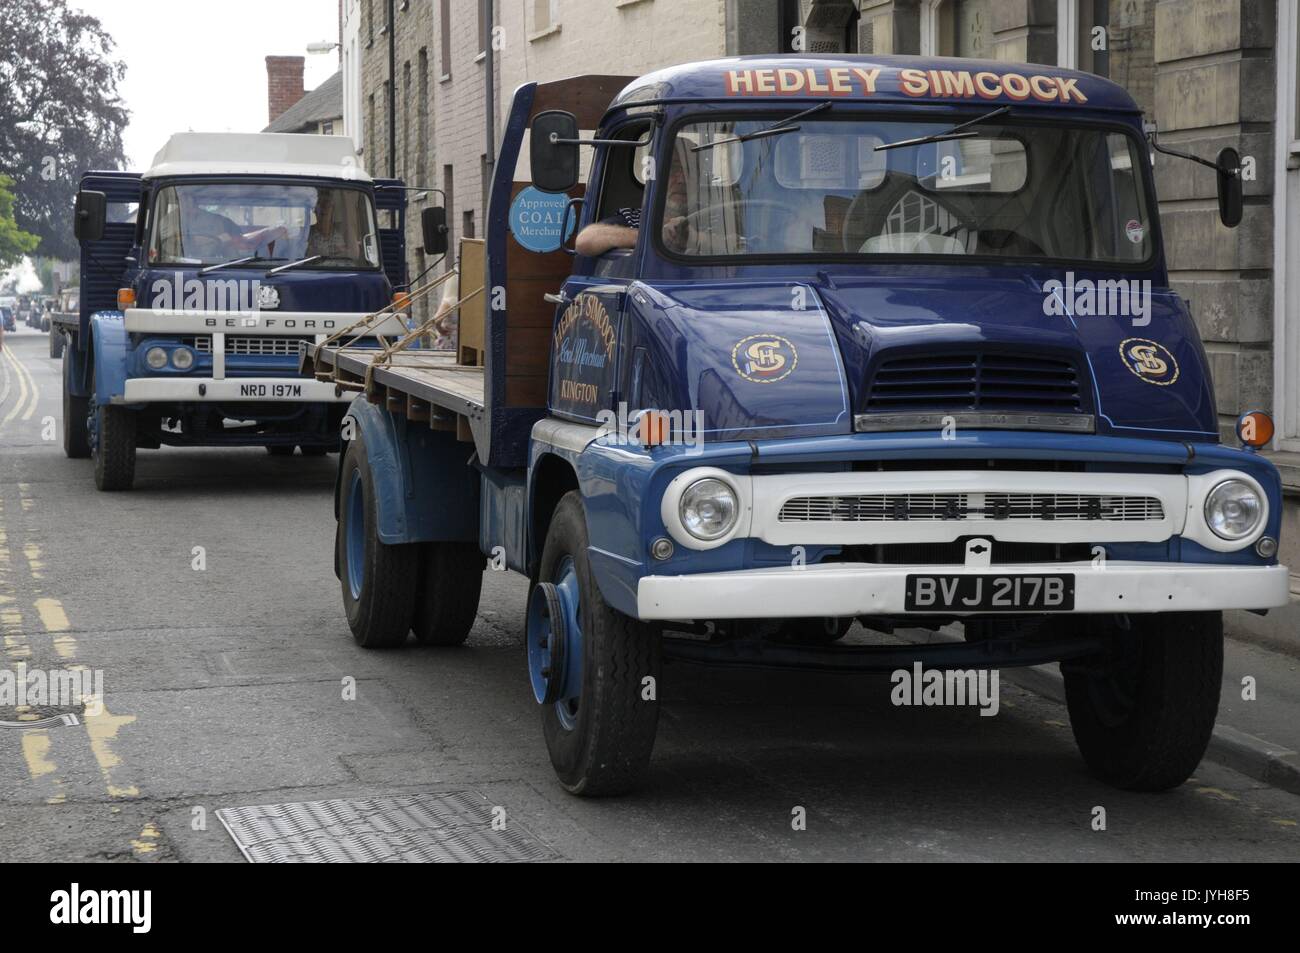 Kington, , UK. 20th Aug, 2017. The Herefordshire market town of Kington came to a standstill while a parade of vintage vehicles made their way to the Kington Vintage Club's 25th Annual Show. Two vintage Bedford Hedley Simcock coal lorrys make their way up to the High Street. Credit: Andrew Compton/Alamy Live News Stock Photo